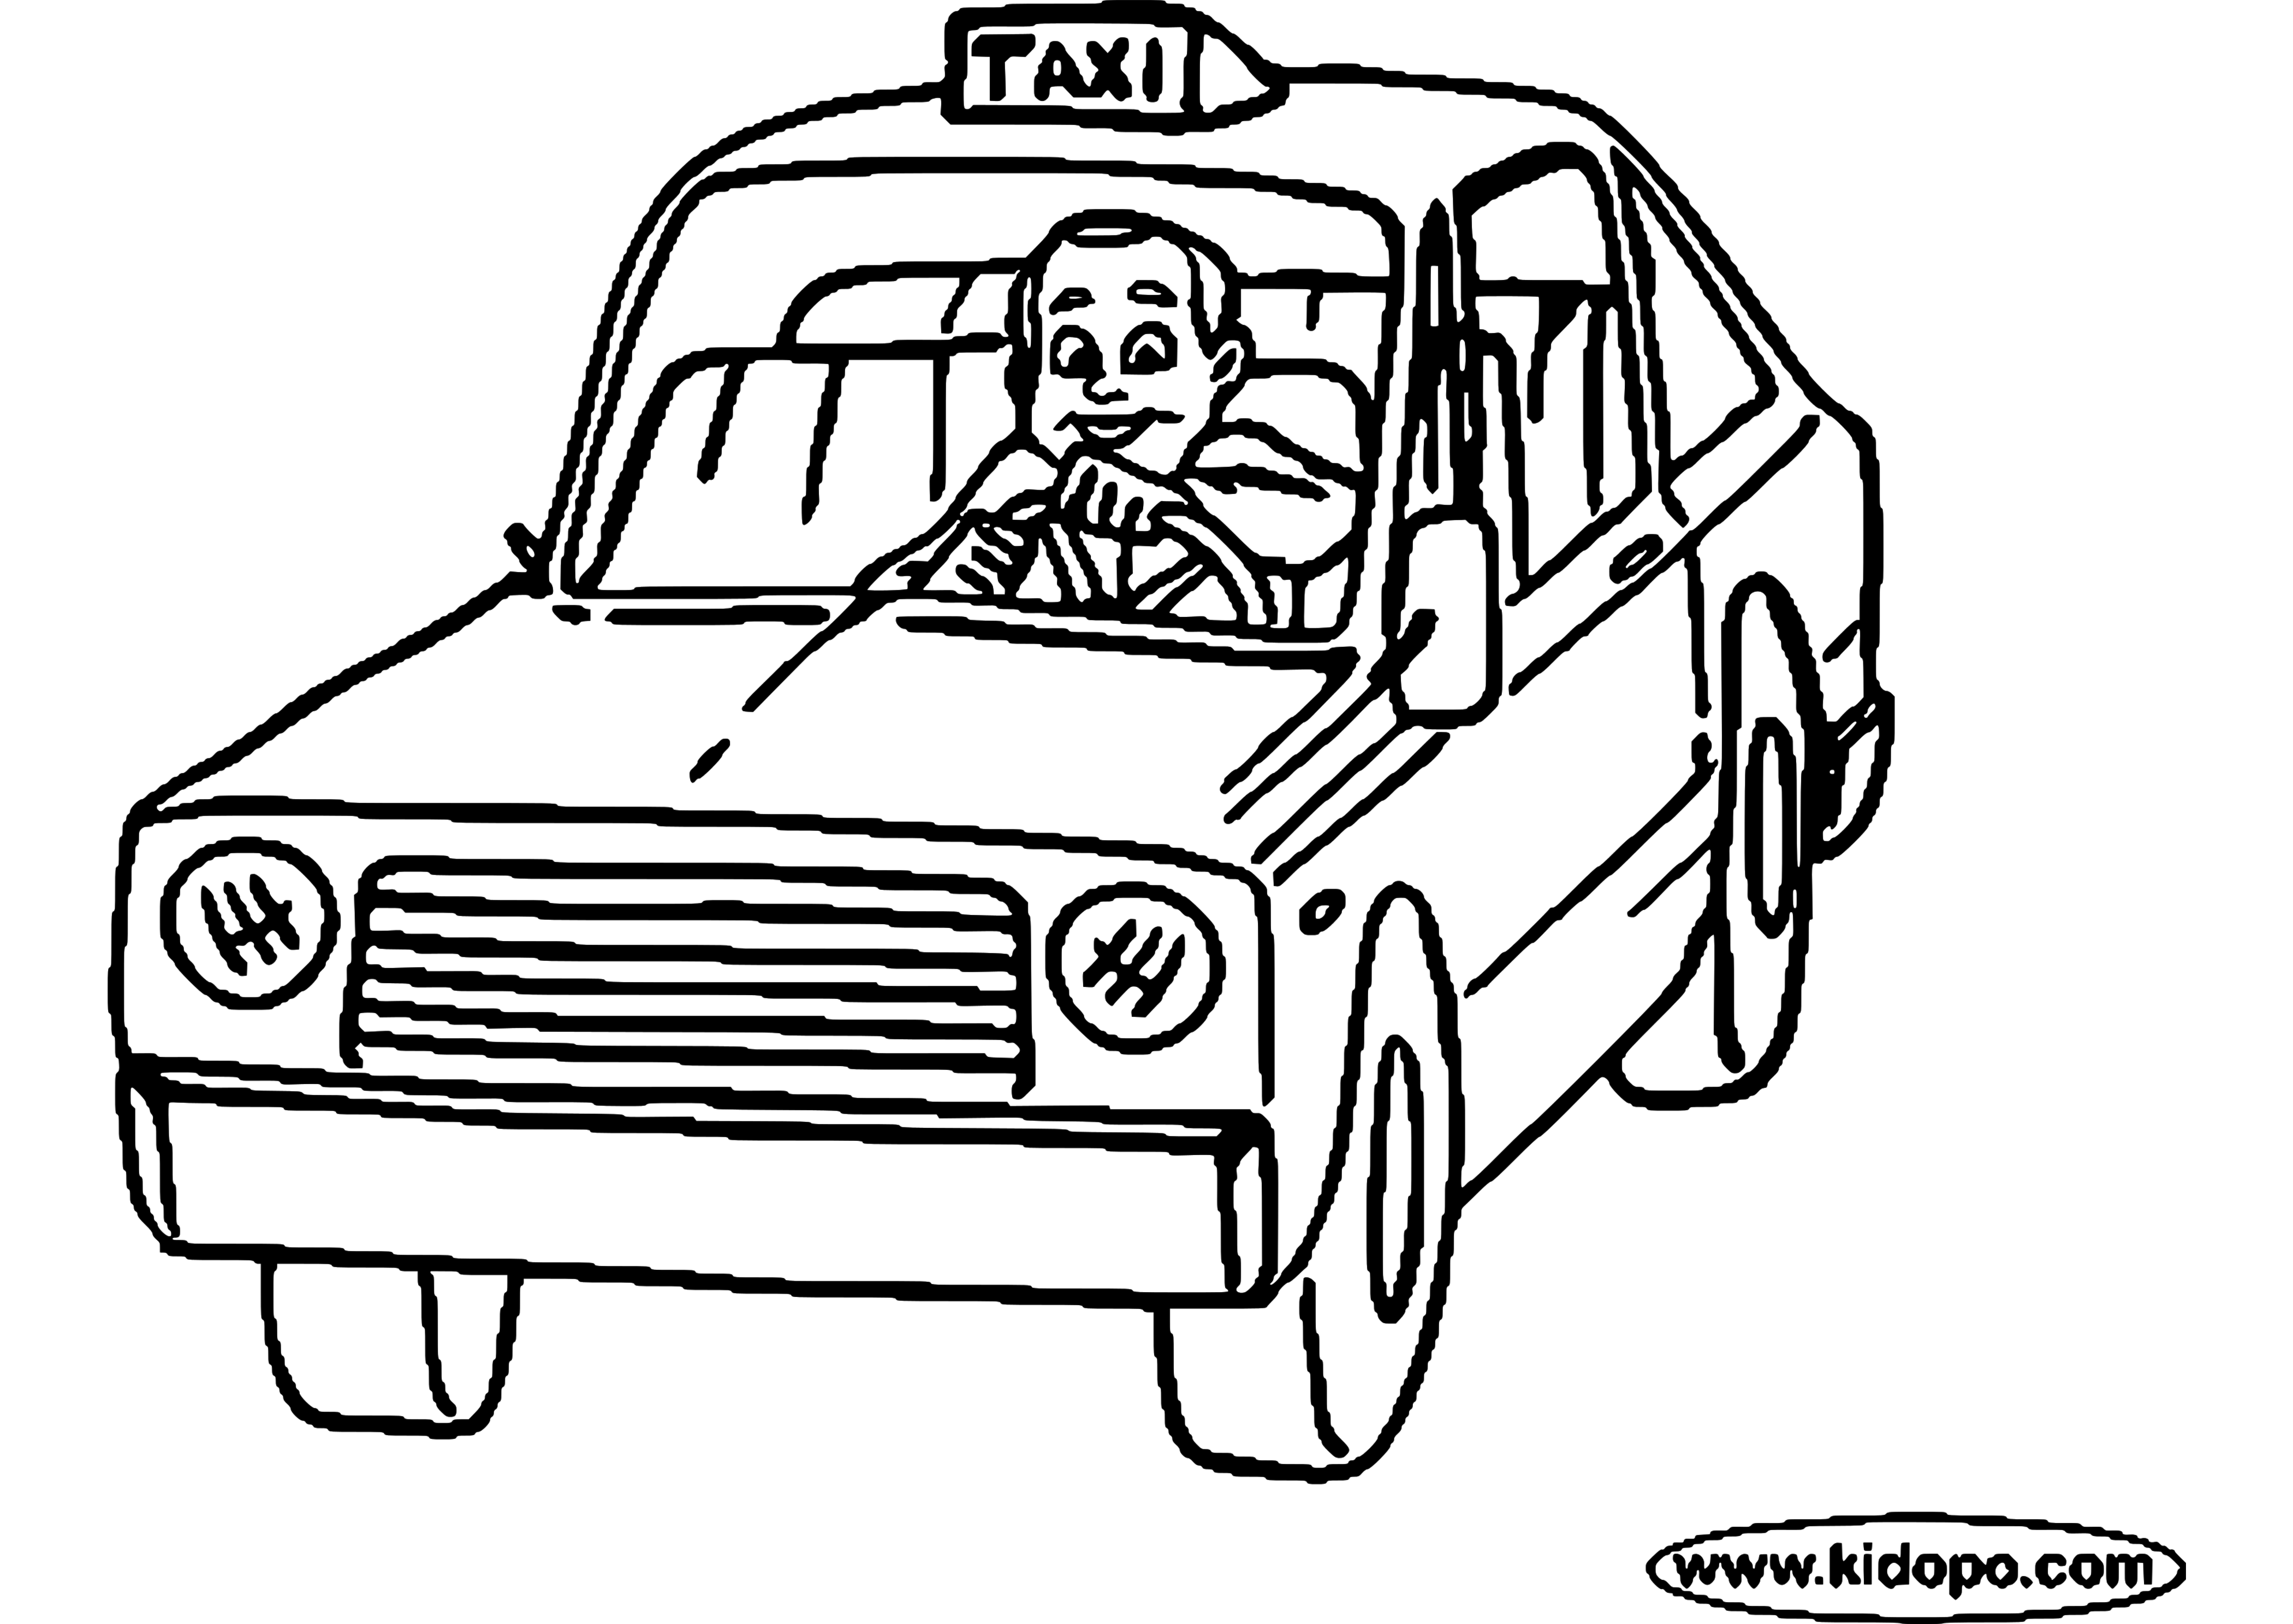 Taxi #36 (Transportation) – Printable coloring pages